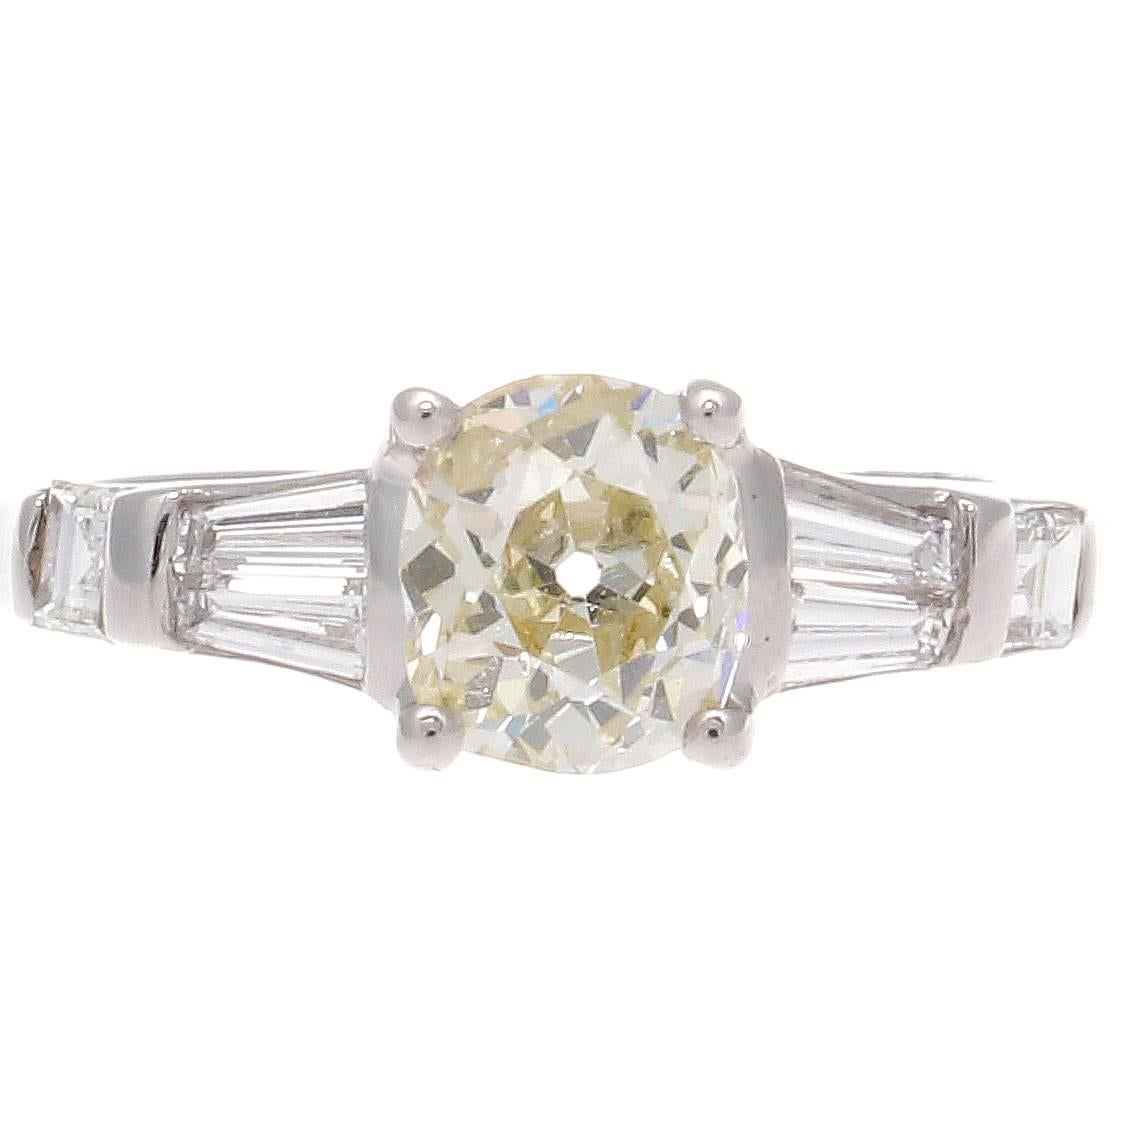 A charming creation of clean elegance. Featuring a 1.18 carat center diamond that has a warm yellow tinge. Accented by white, clean baguette and square cut diamonds. Hand crafted in platinum.